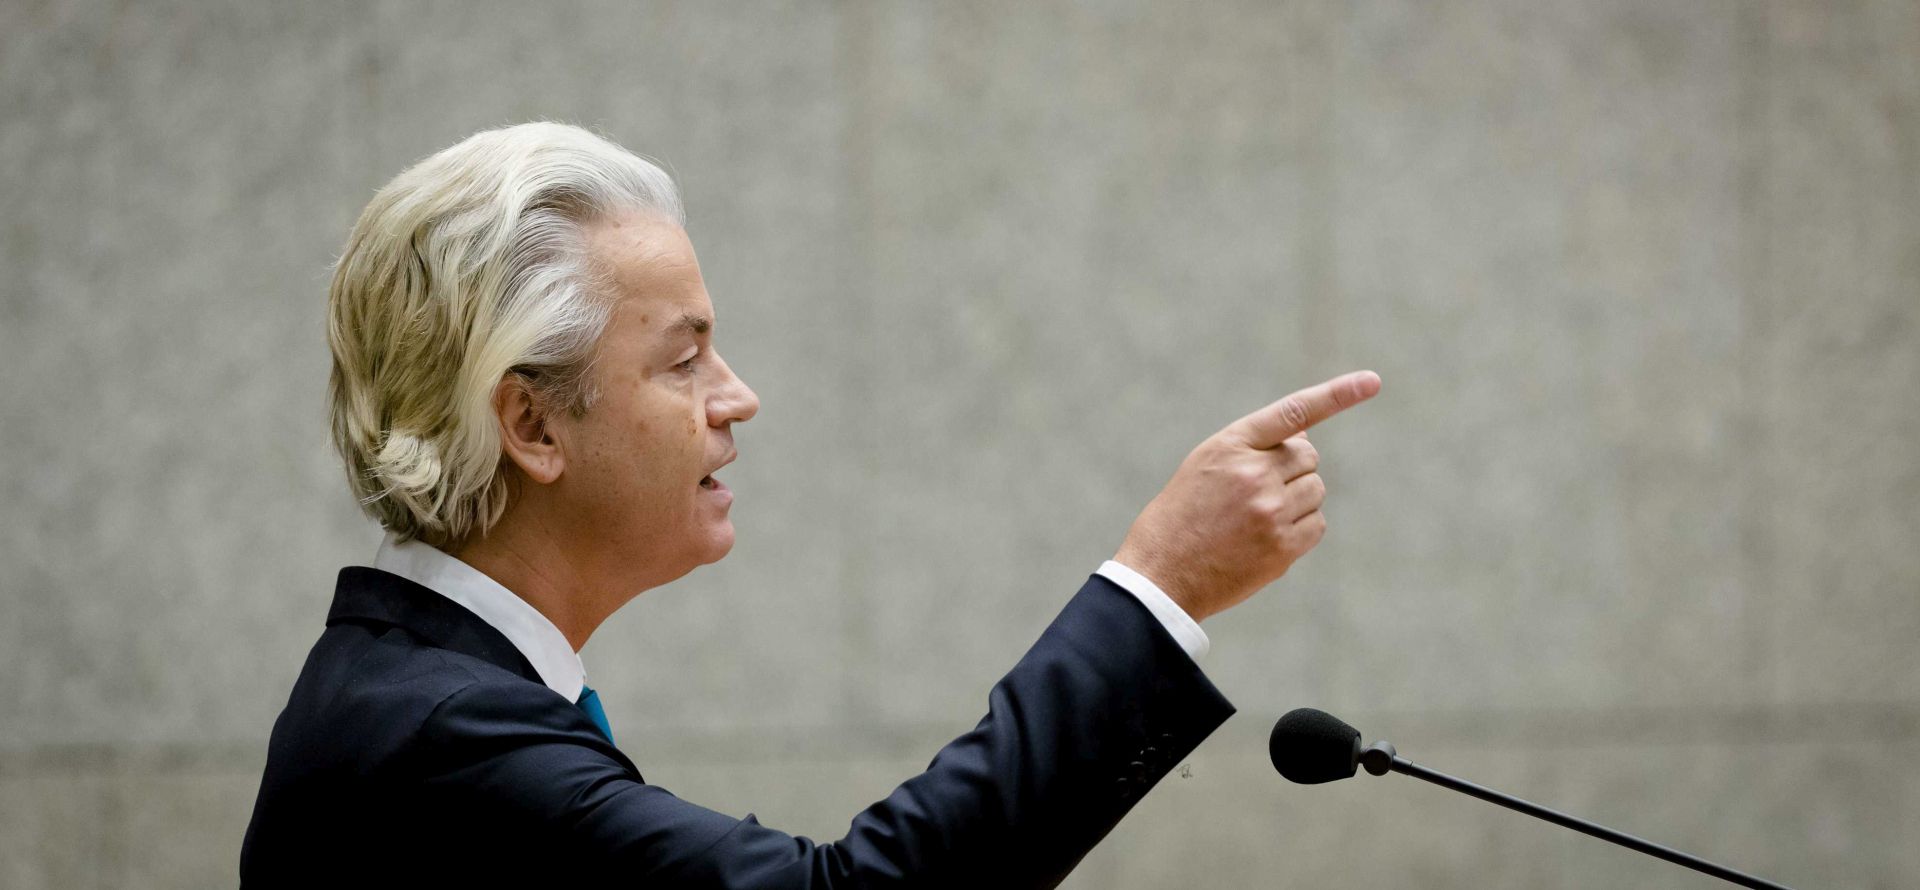 epa05032404 Dutch right wing politician Geert Wilders of the Freedom Party speaks during a debate, about the attacks in Paris, in The Hague, The Netherlands, 19 November 2015. Wilders demands that the Dutch borders be closed and suspected persons should be locked up preventively to prevent them from carrying out an attack.  EPA/BART MAAT